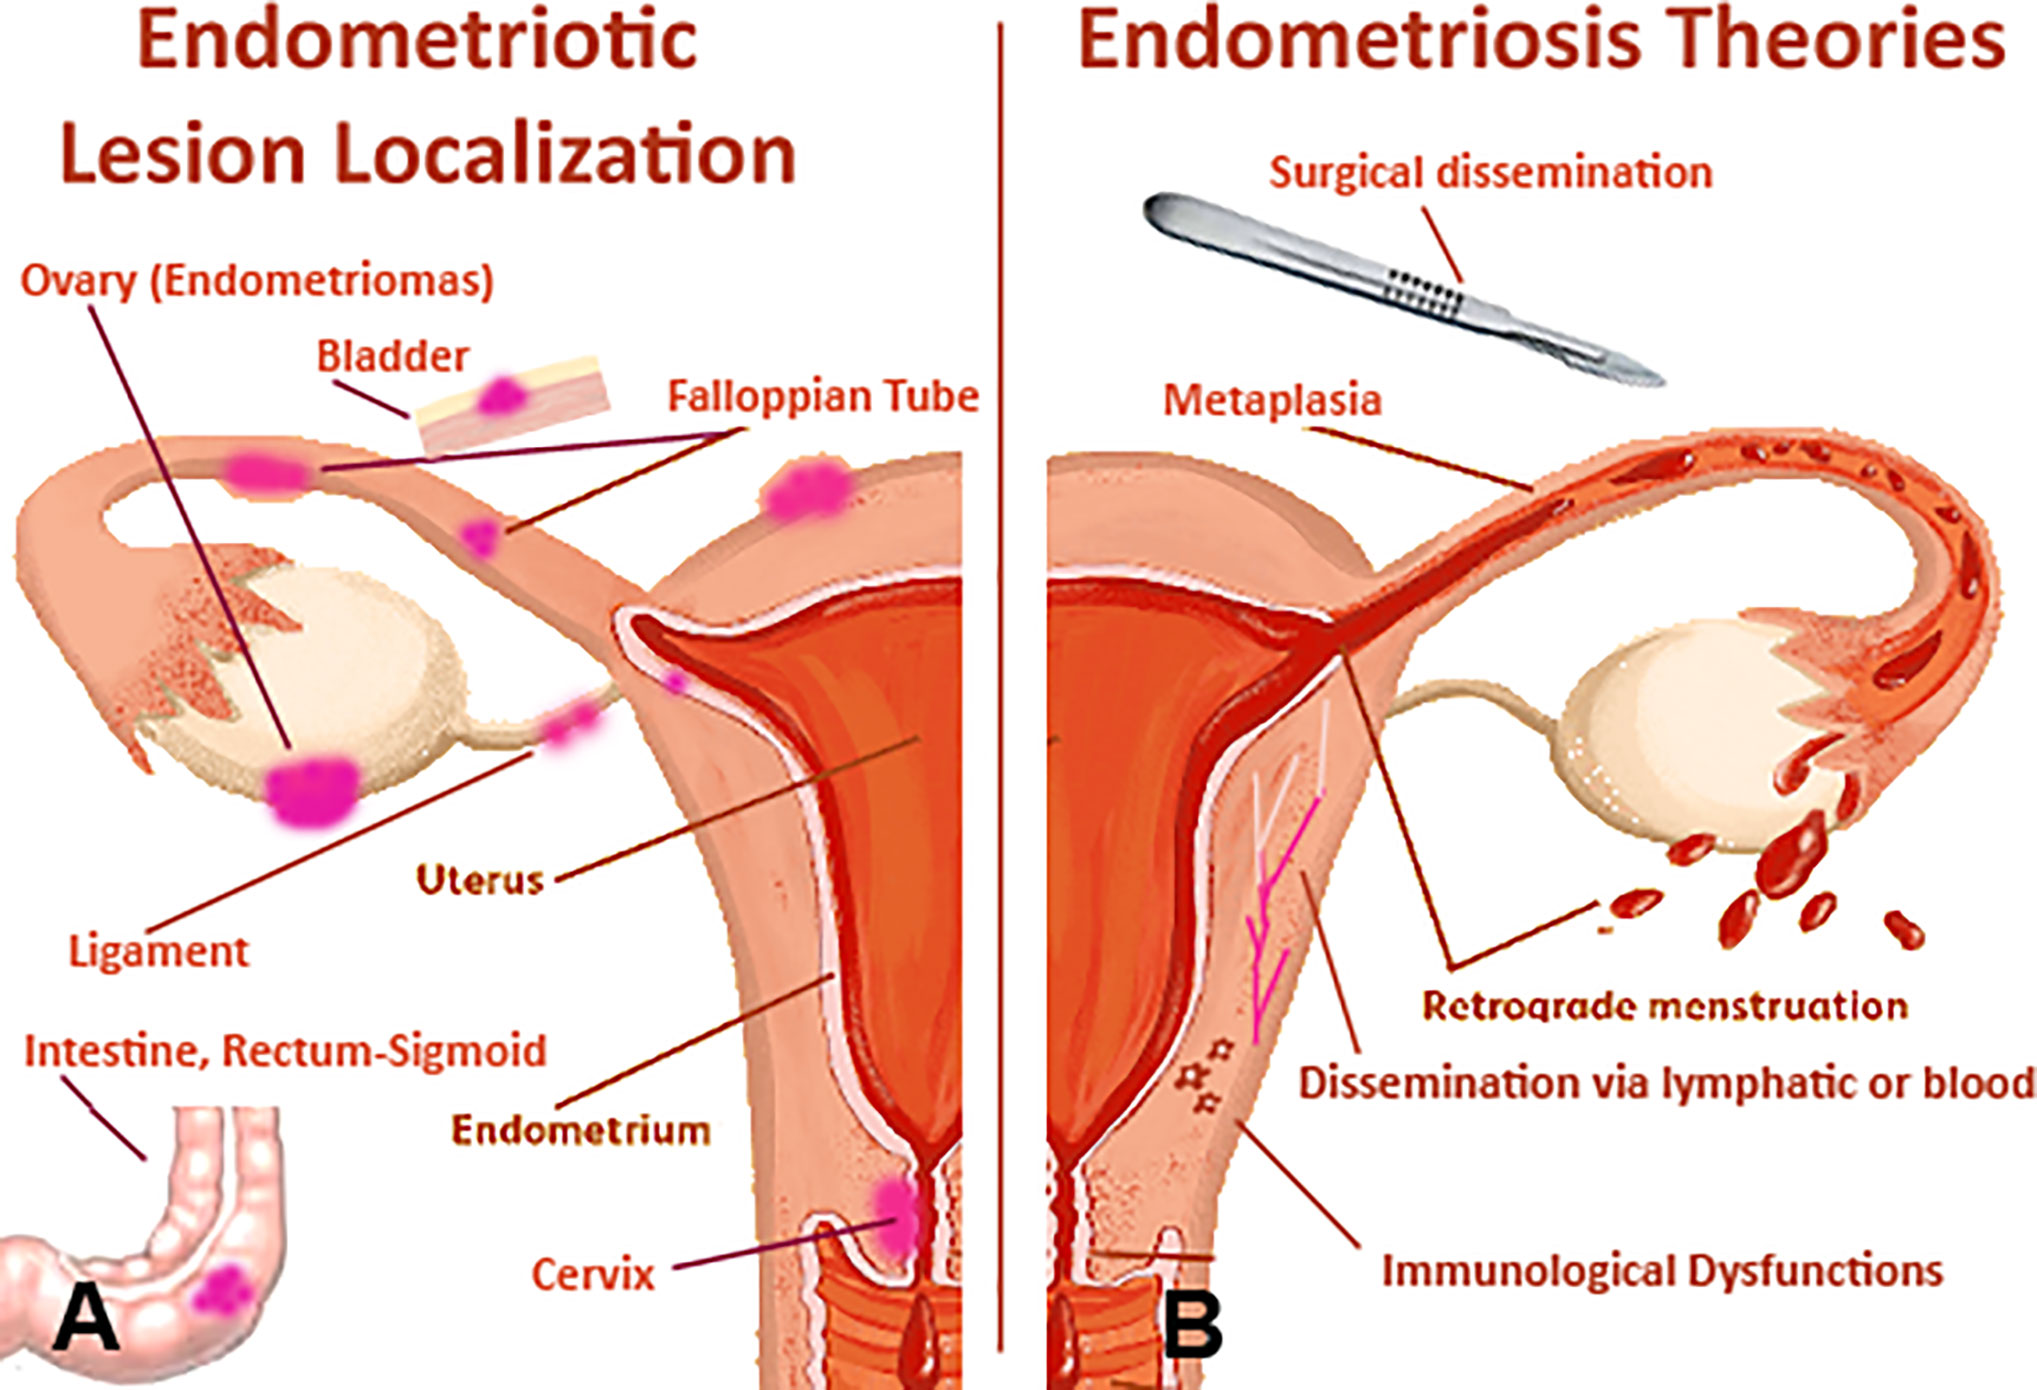 Amandeep Group of Hospitals - Endometriosis is a chronic condition